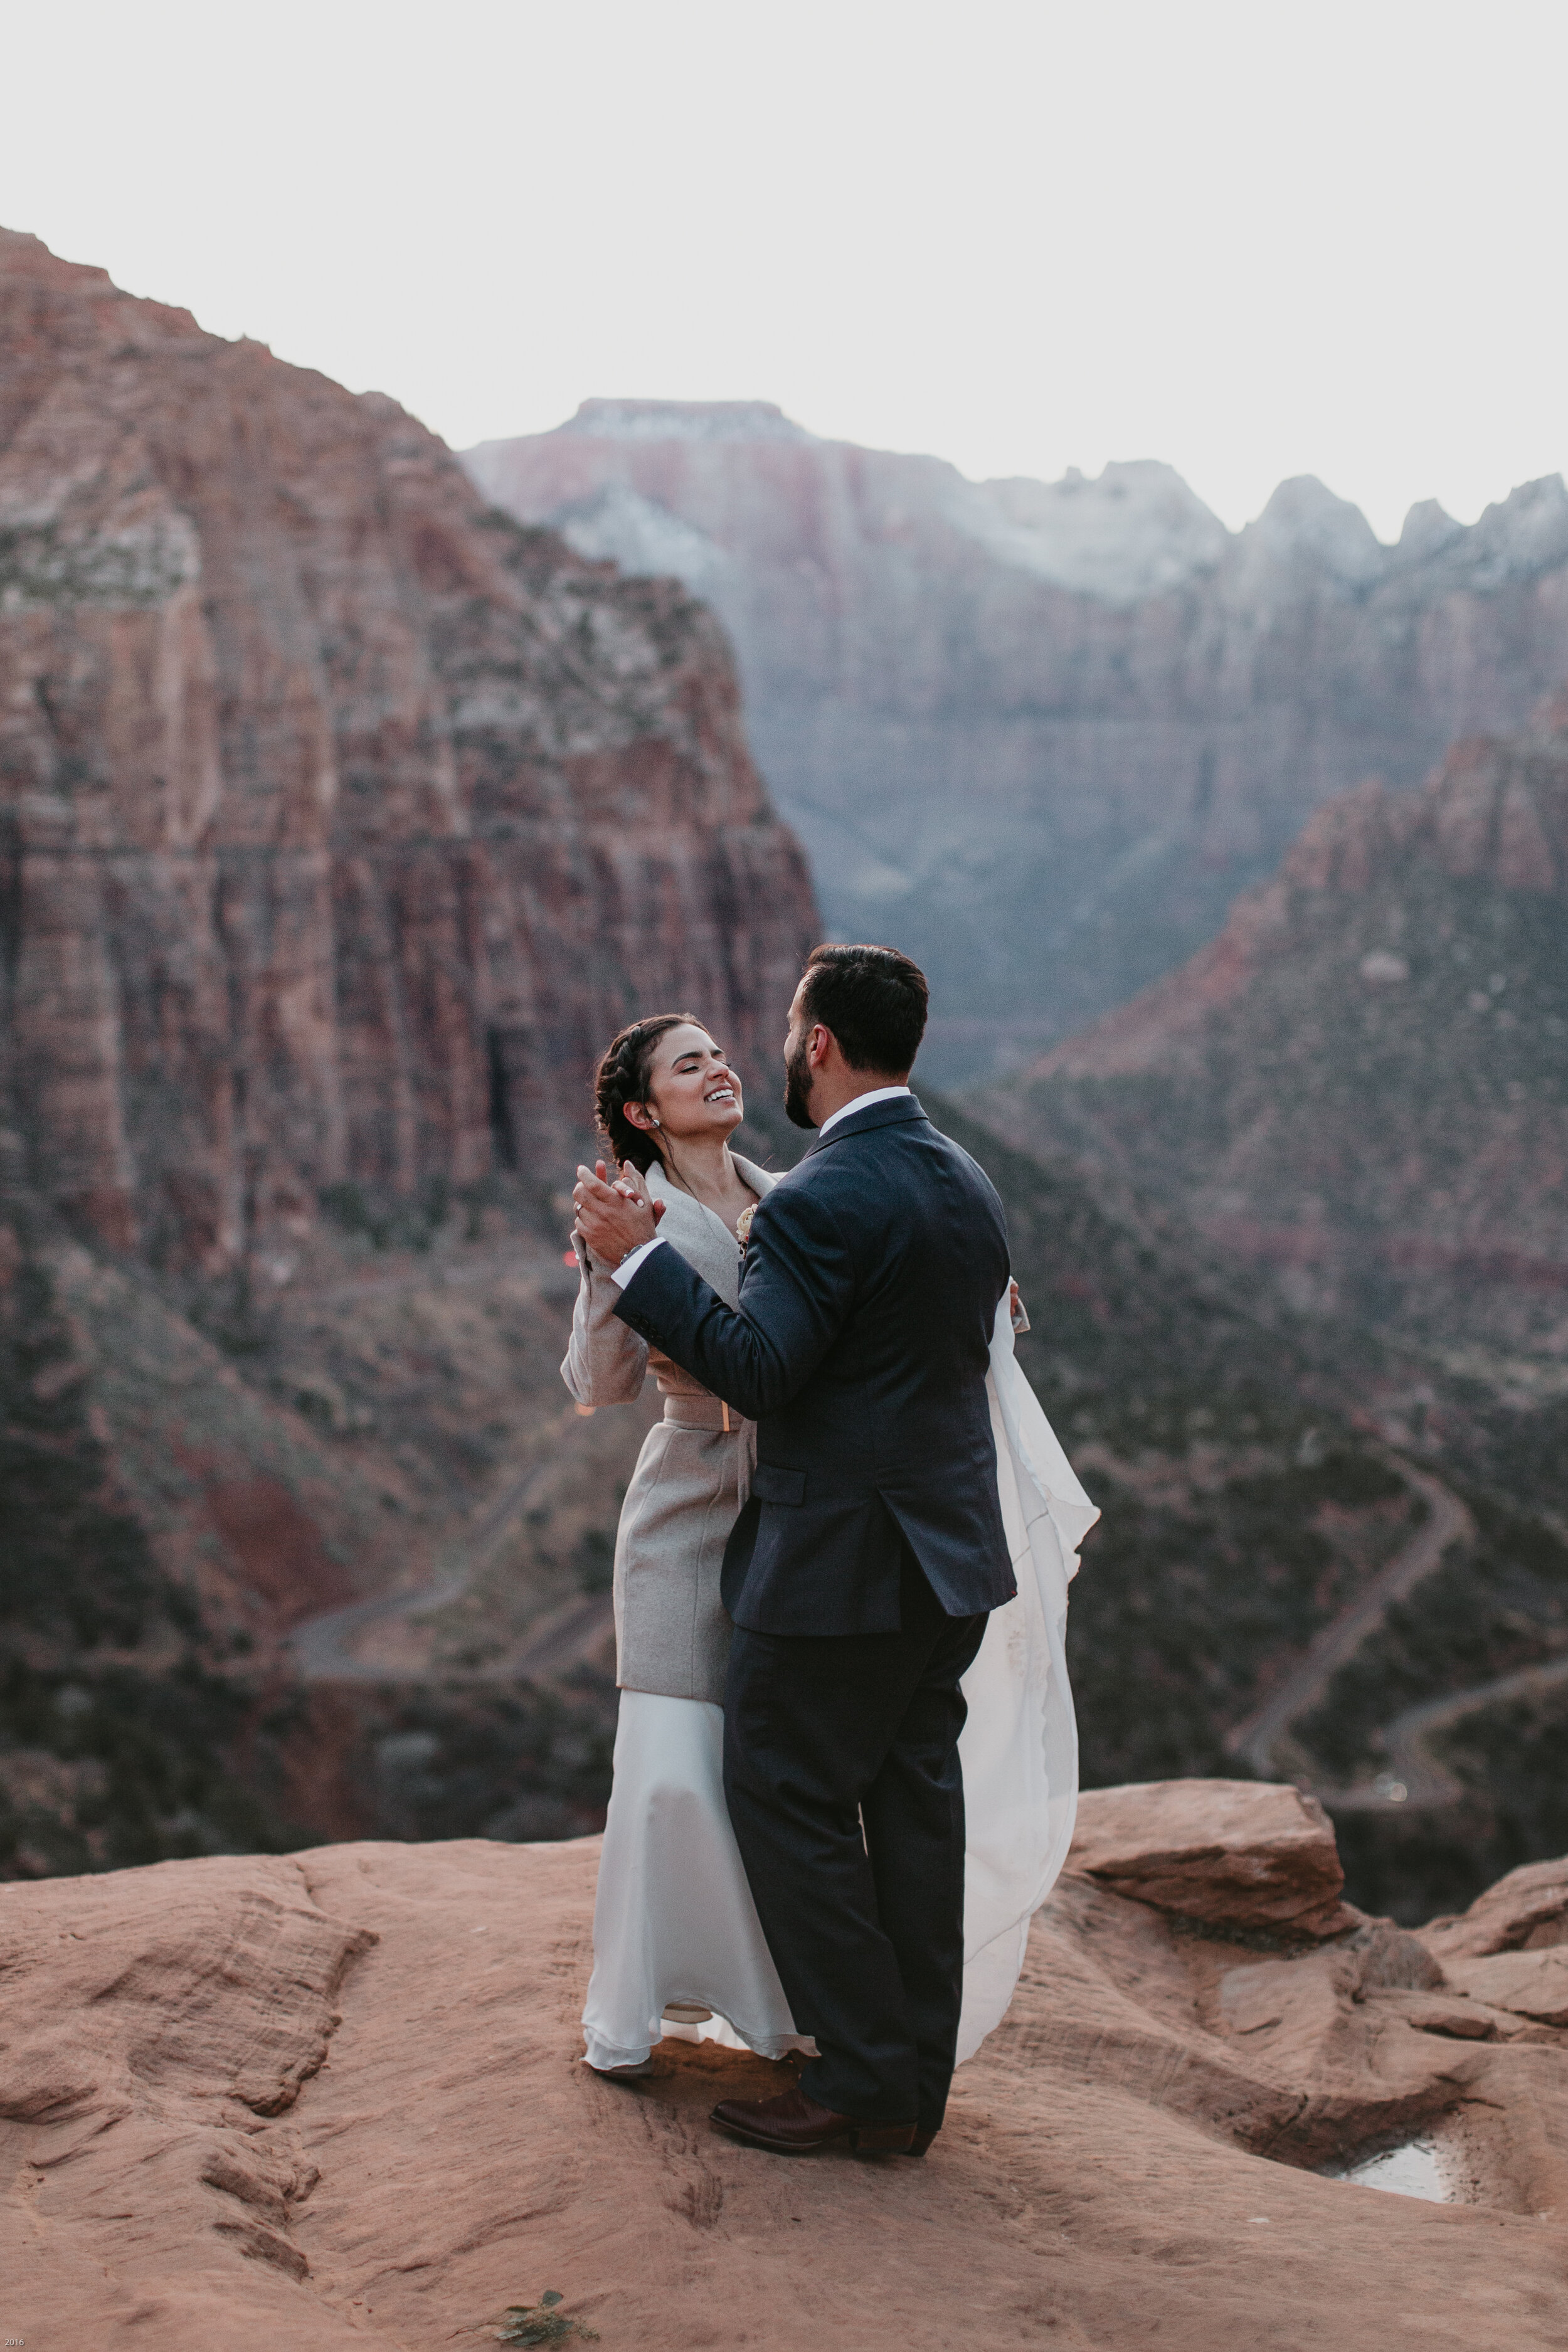 Nicole-Daacke-Photography-snowy-hiking-elopement-in-zion-national-park-zion-elopement-photographer-canyon-overlook-trial-brial-portraits-in-mt-zion-national-park-utah-desert-adventure-elopement-photographer-173.jpg